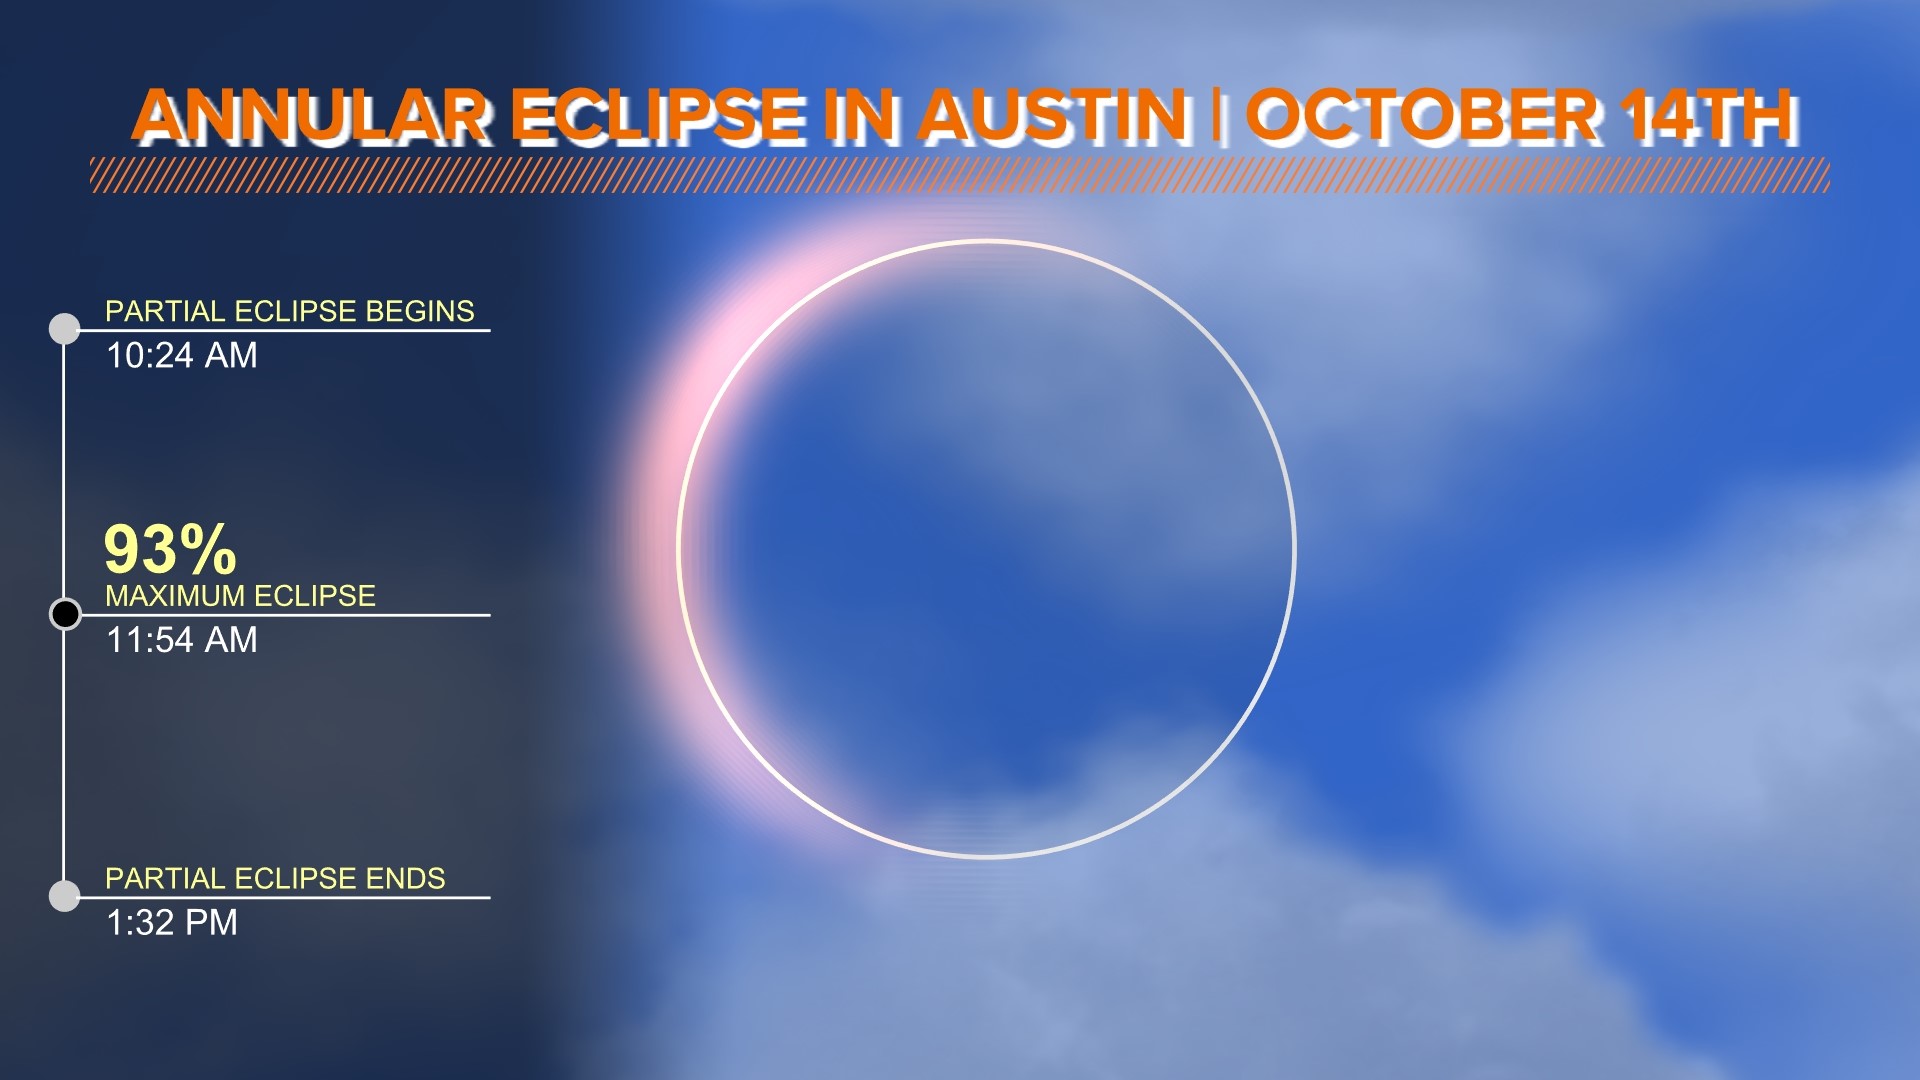 UT Austin astrophysicist Torvald Hessel speaks with our Meteorologist Jordan Darensbourg about the upcoming solar eclipse on October 14th.